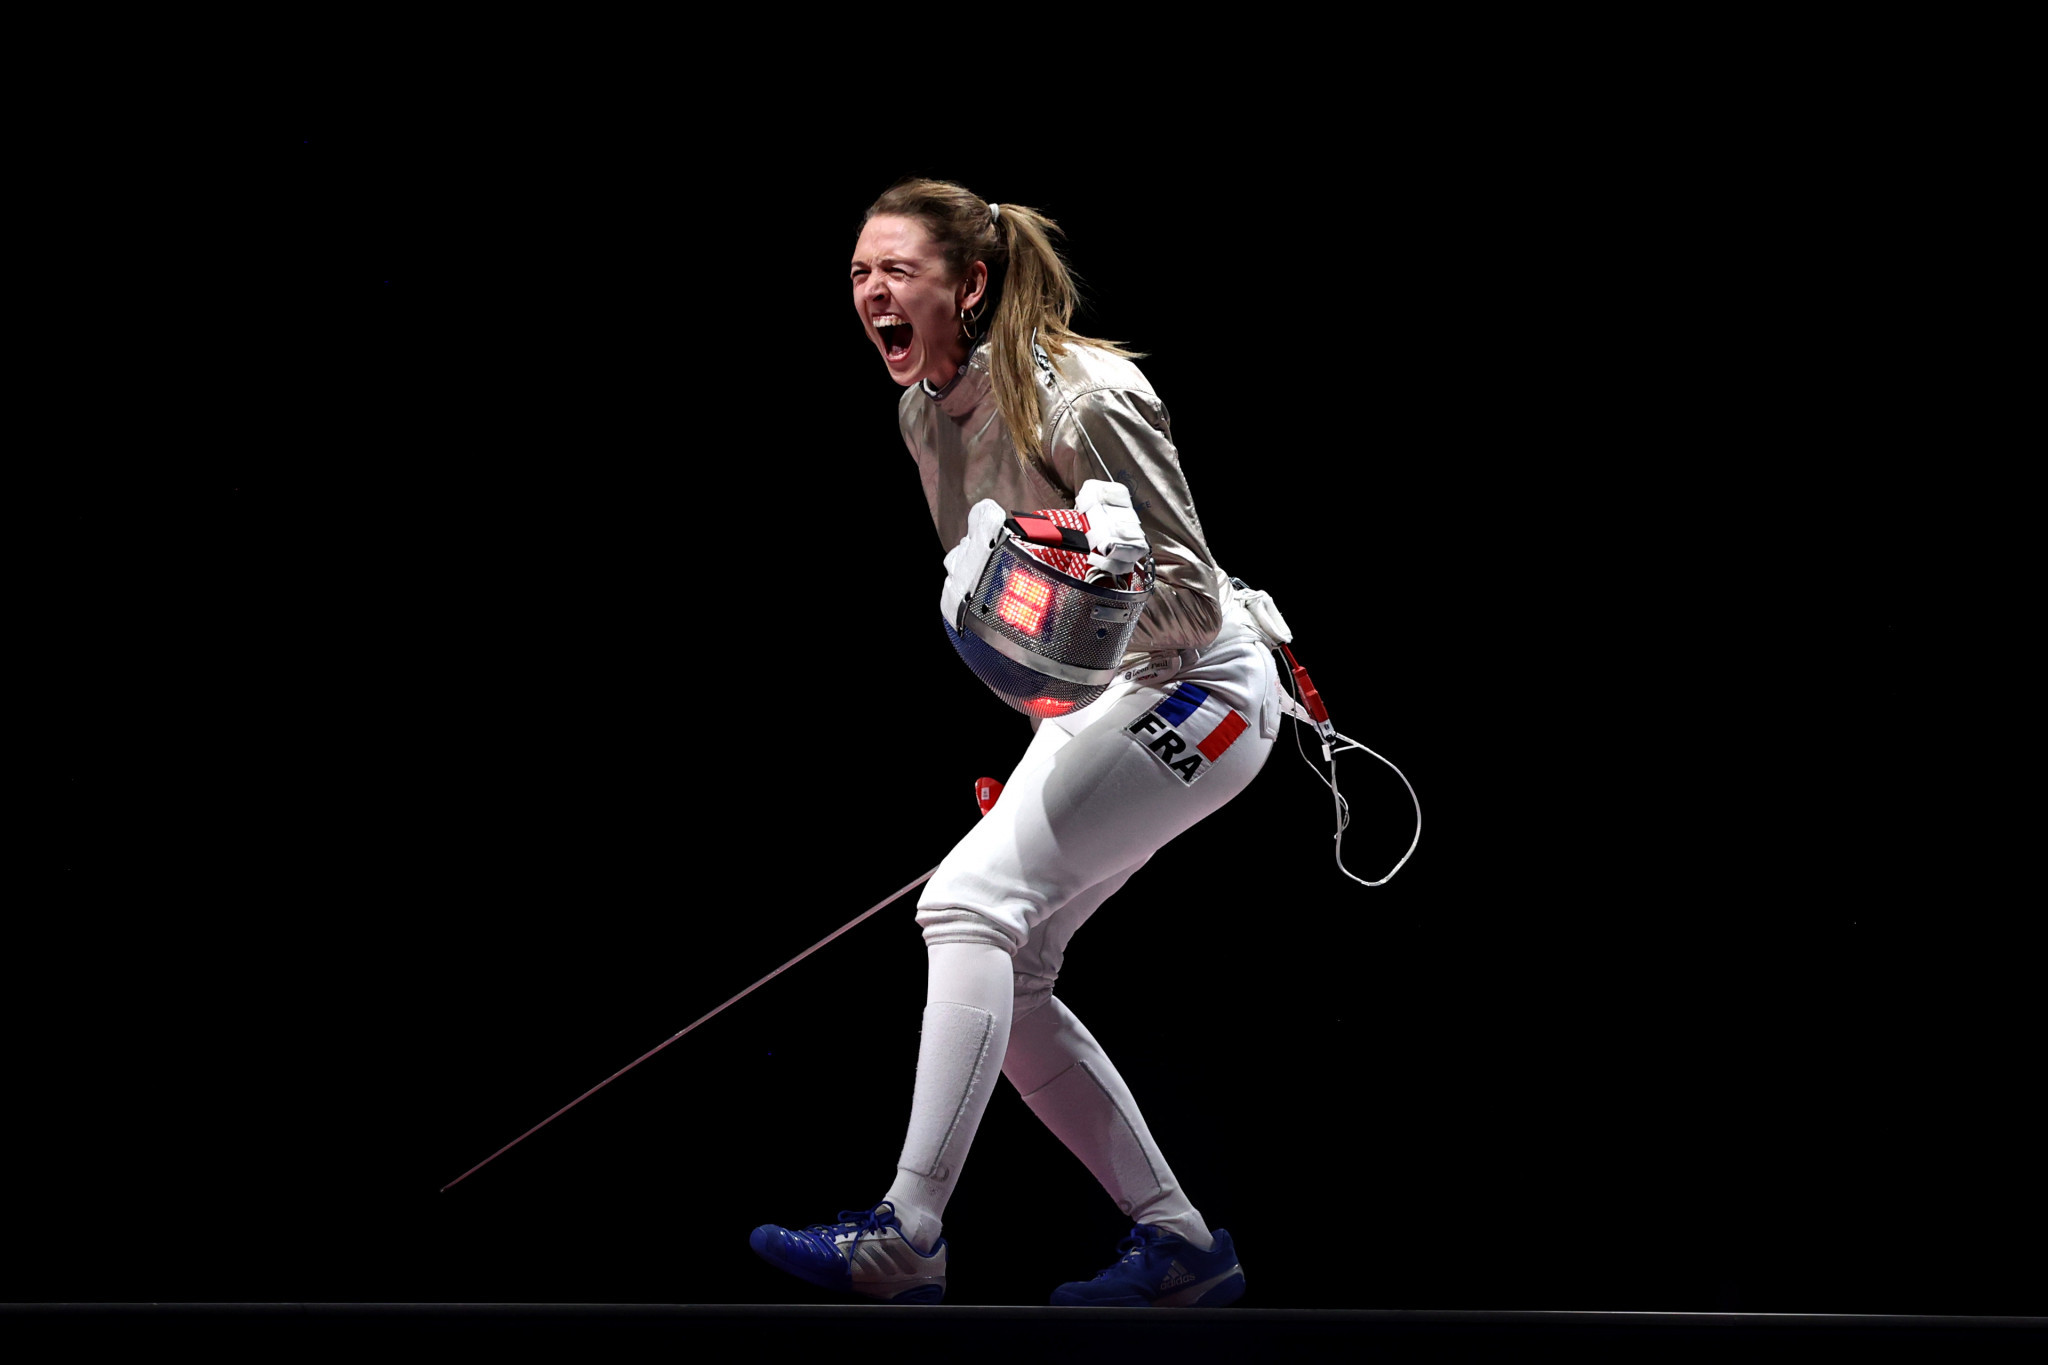 Apithy-Brunet and Macchi seal historic titles at European Fencing Championships